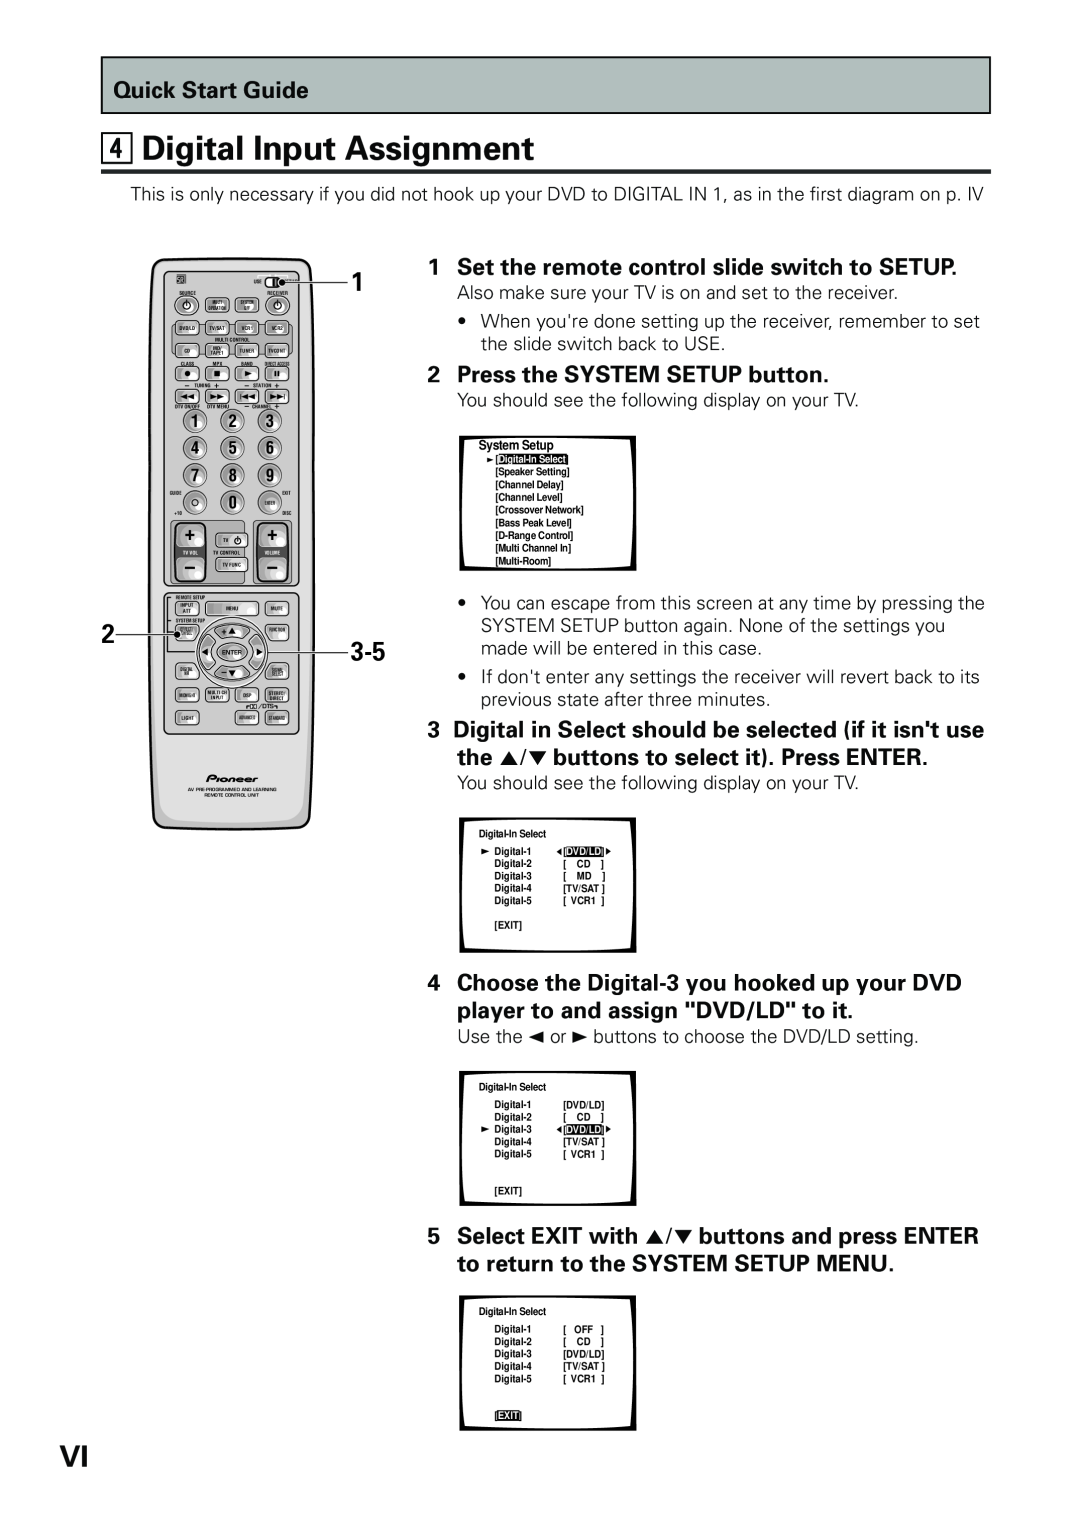 Pioneer VSX-D909S 4Digital Input Assignment, 1Set the remote control slide switch to SETUP, 2Press the SYSTEM SETUP button 